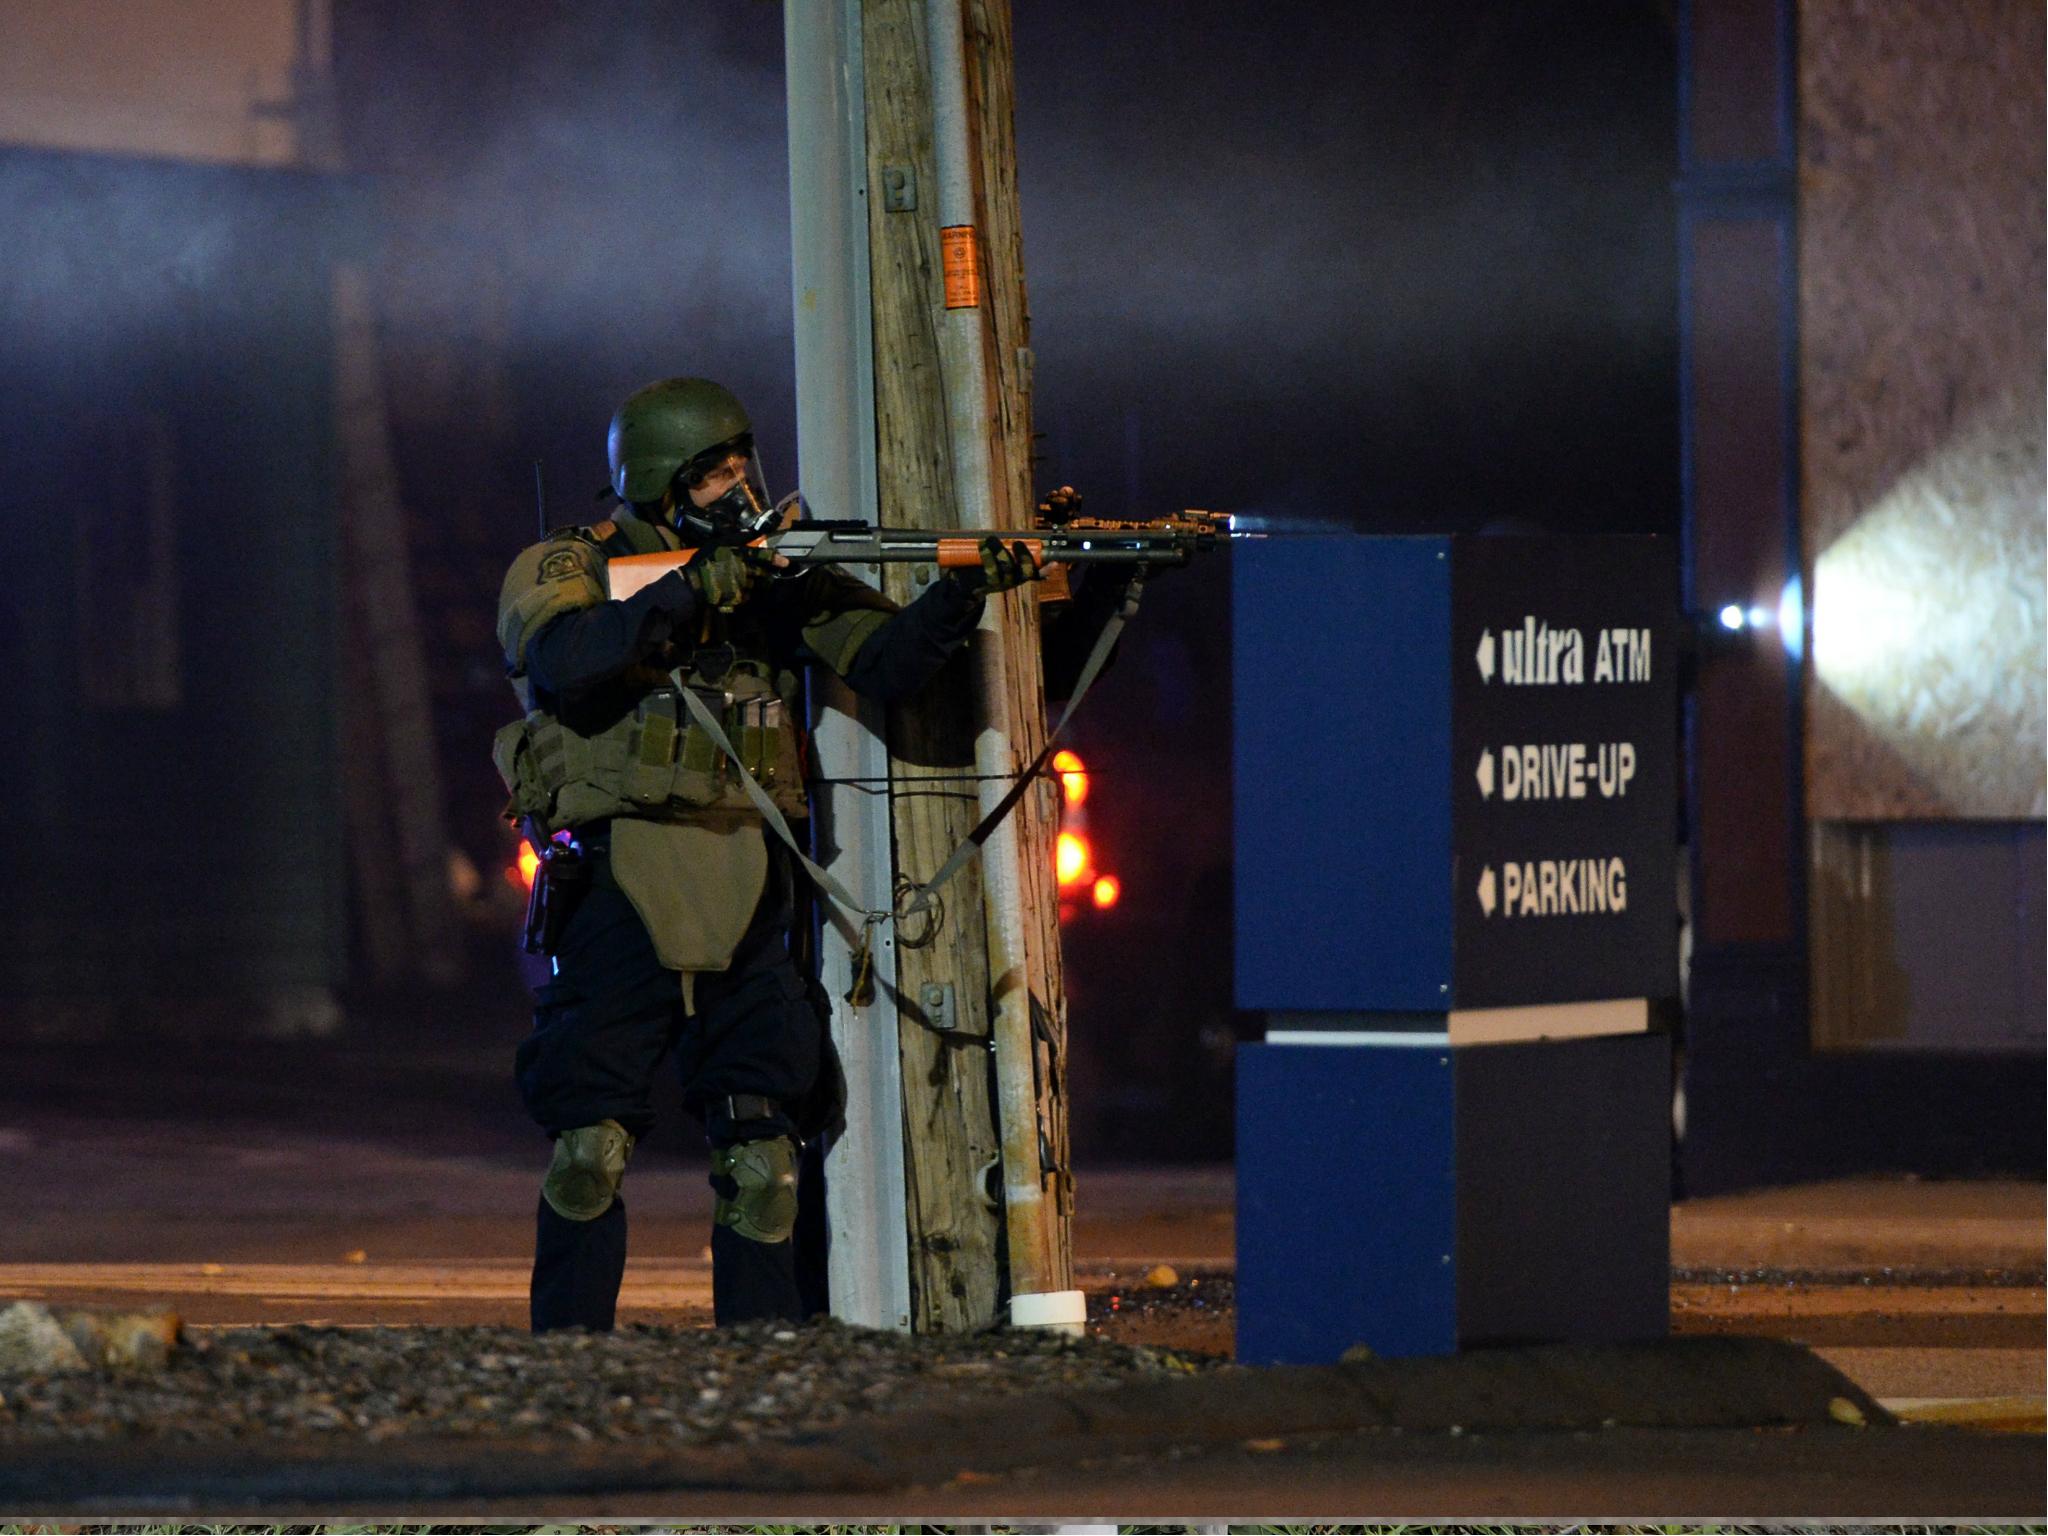 A state trooper aims his gun at protesters in Ferguson, Missouri, on 25 November 25 2014 during a demonstration one day after violent protests and looting following the grand jury decision in the Michael Brown police shooting case